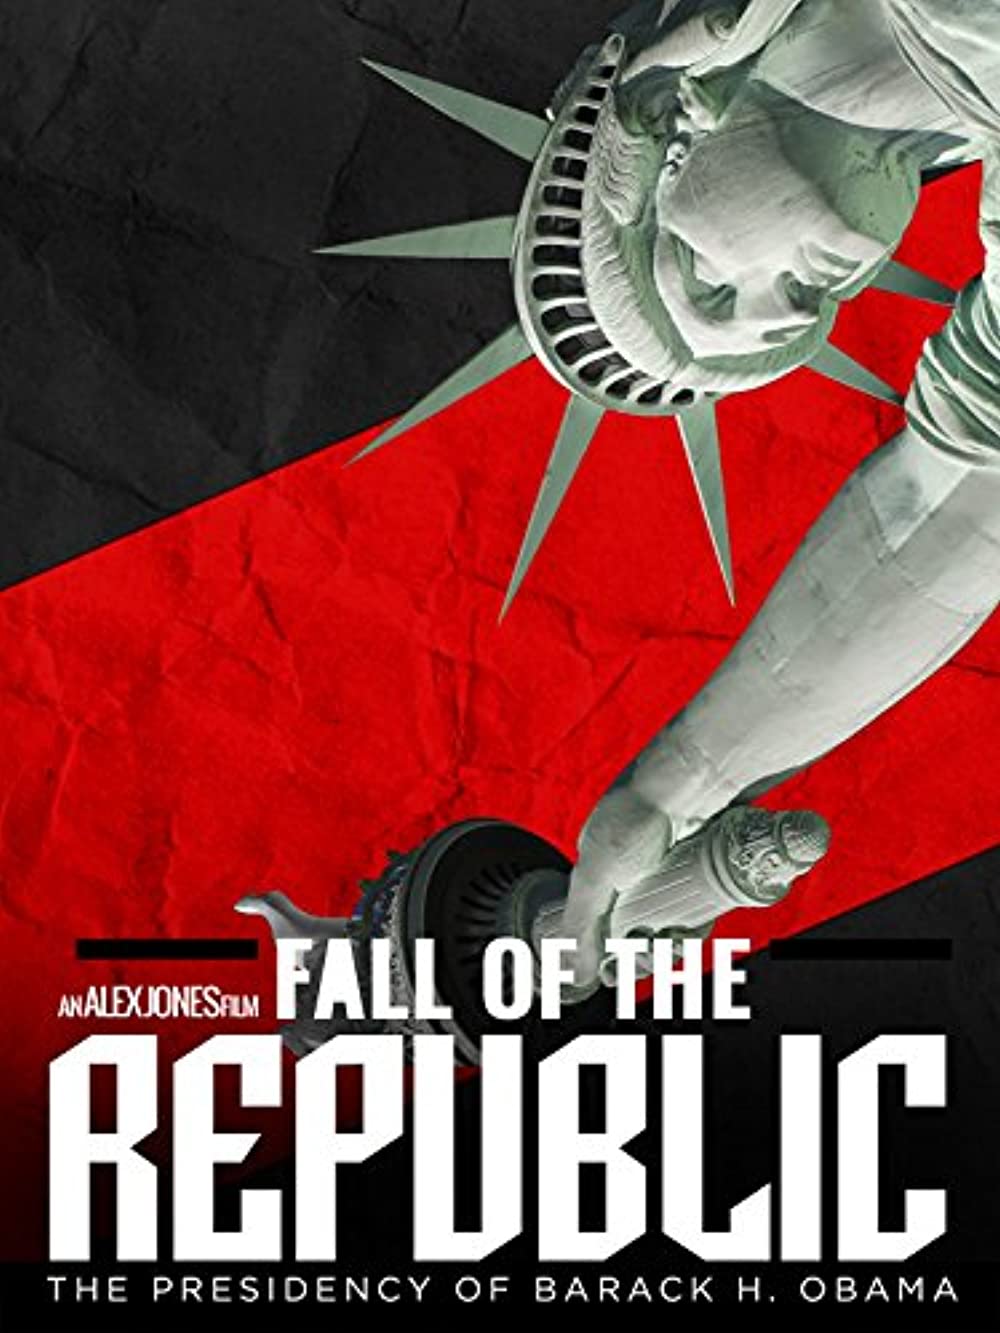 Download Fall of the Republic: The Presidency of Barack H. Obama Movie | Fall Of The Republic: The Presidency Of Barack H. Obama Movie Review